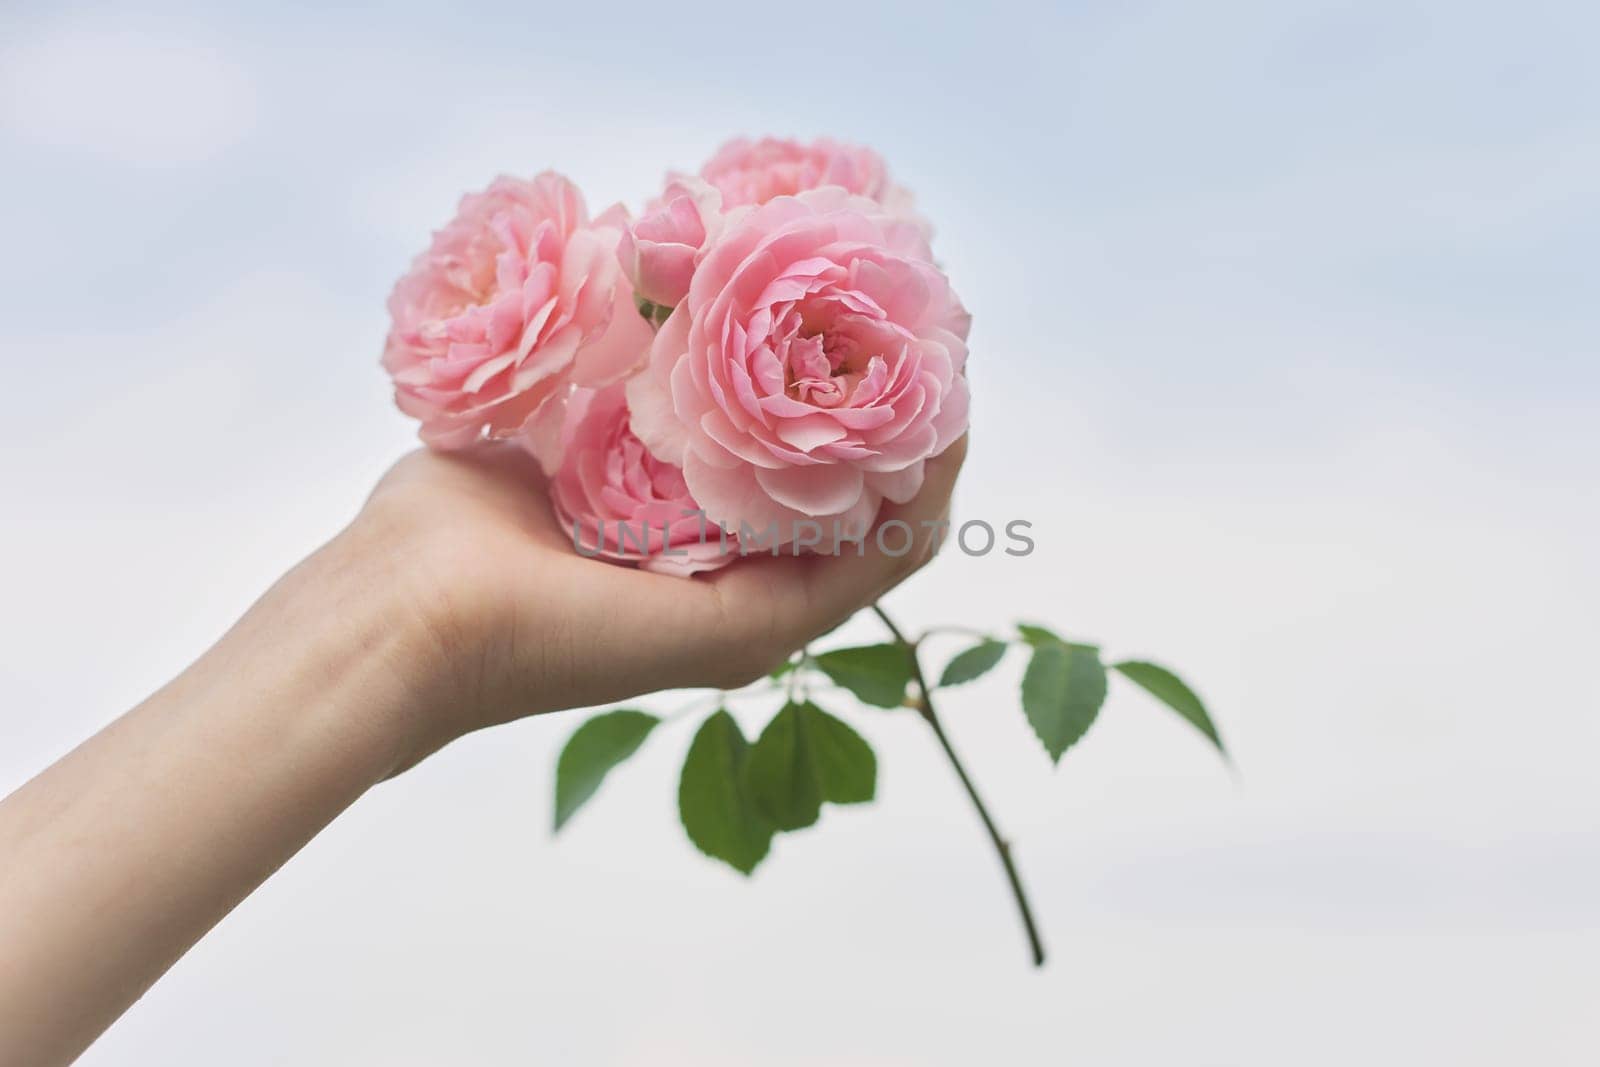 Female hand holding pink rose flower, background blue clear sky in clouds by VH-studio